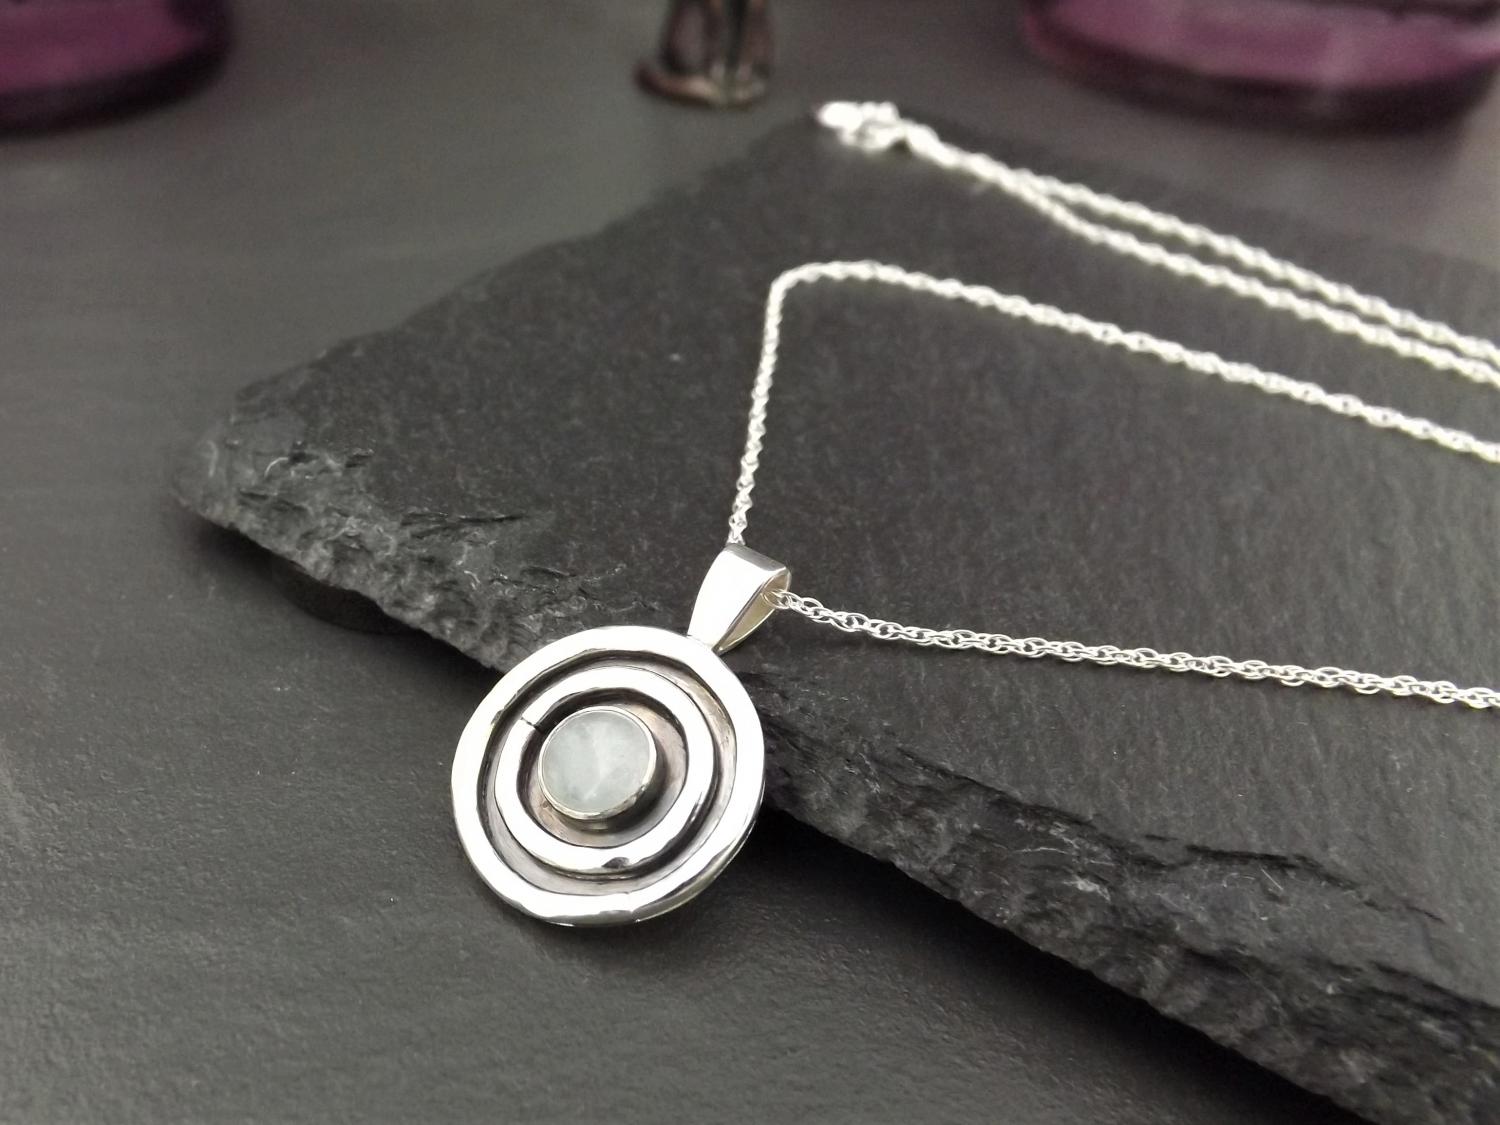 Aquamarine in Hammered Silver Circles Pendant Necklace